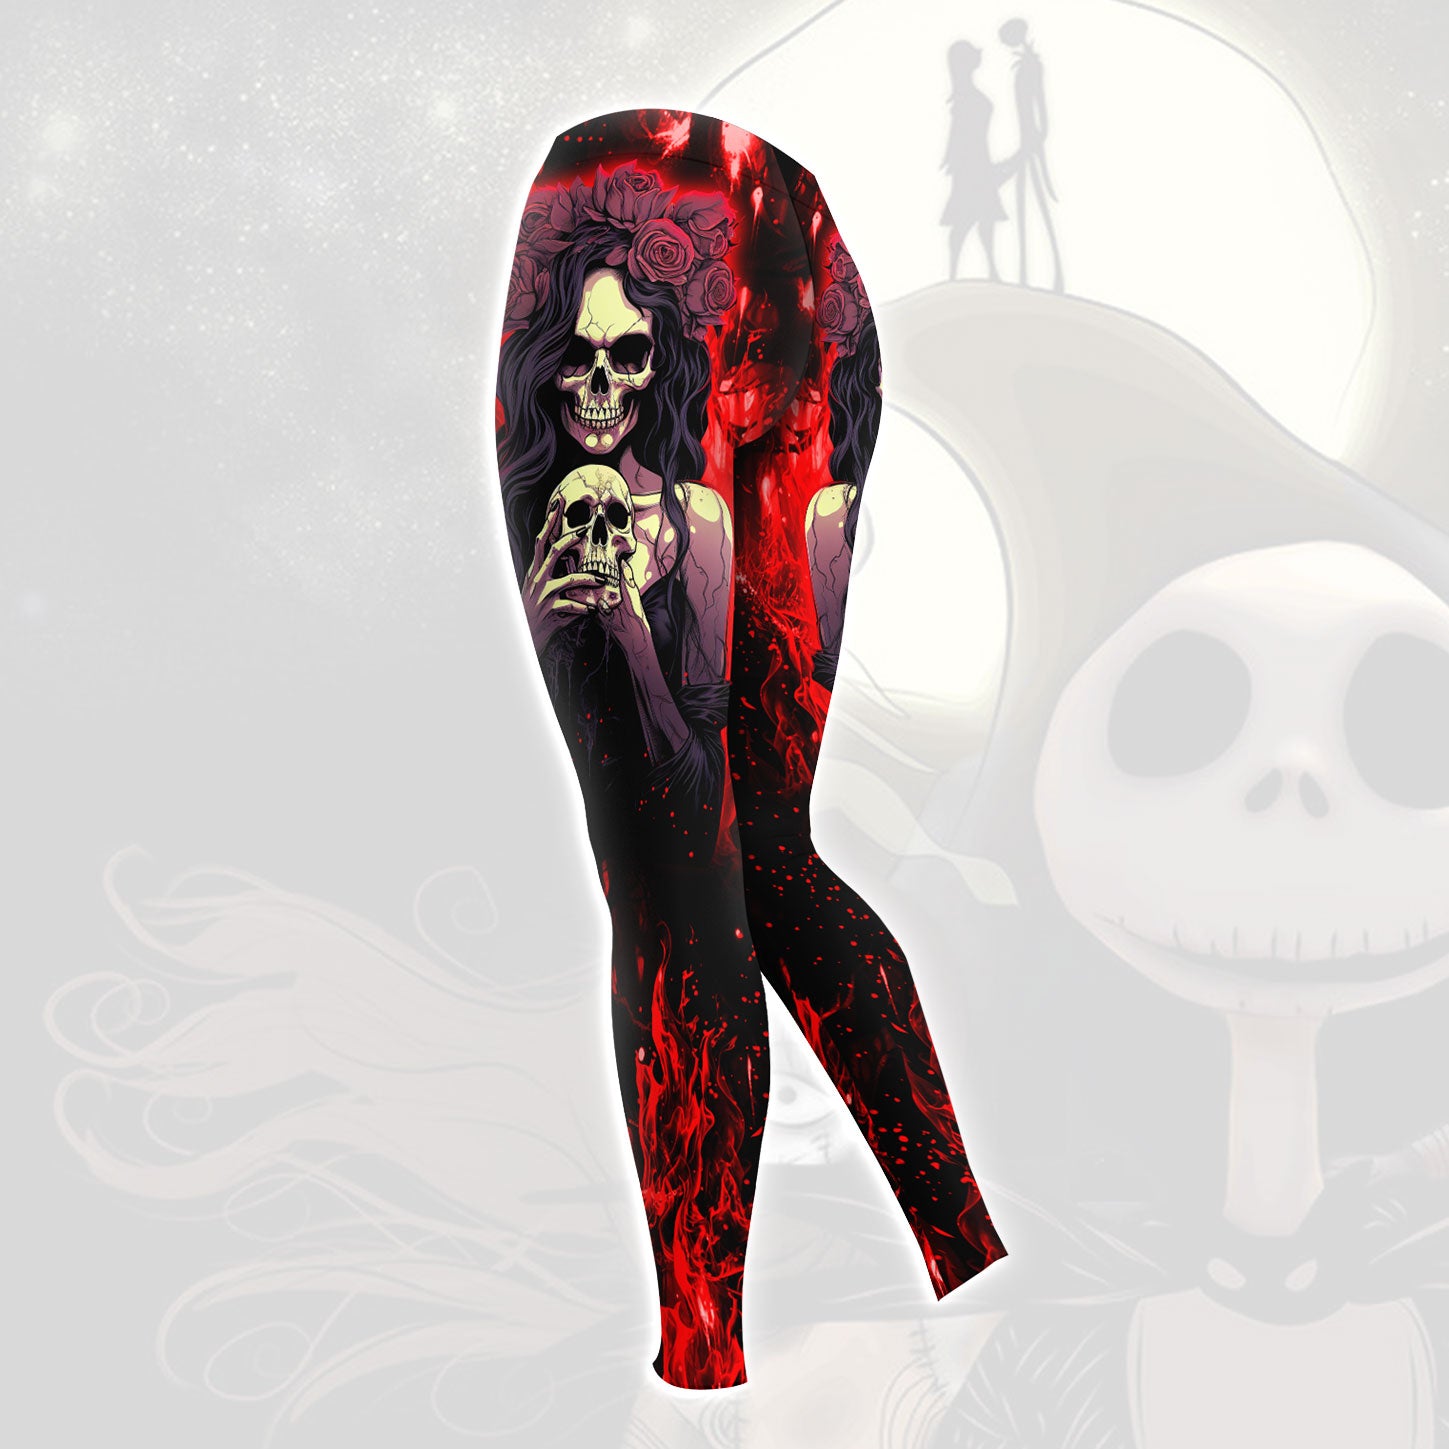 Red Fire Skull Art Combo Hoodie and Leggings - Dark and edgy matching set with skull designs for a unique and stylish look